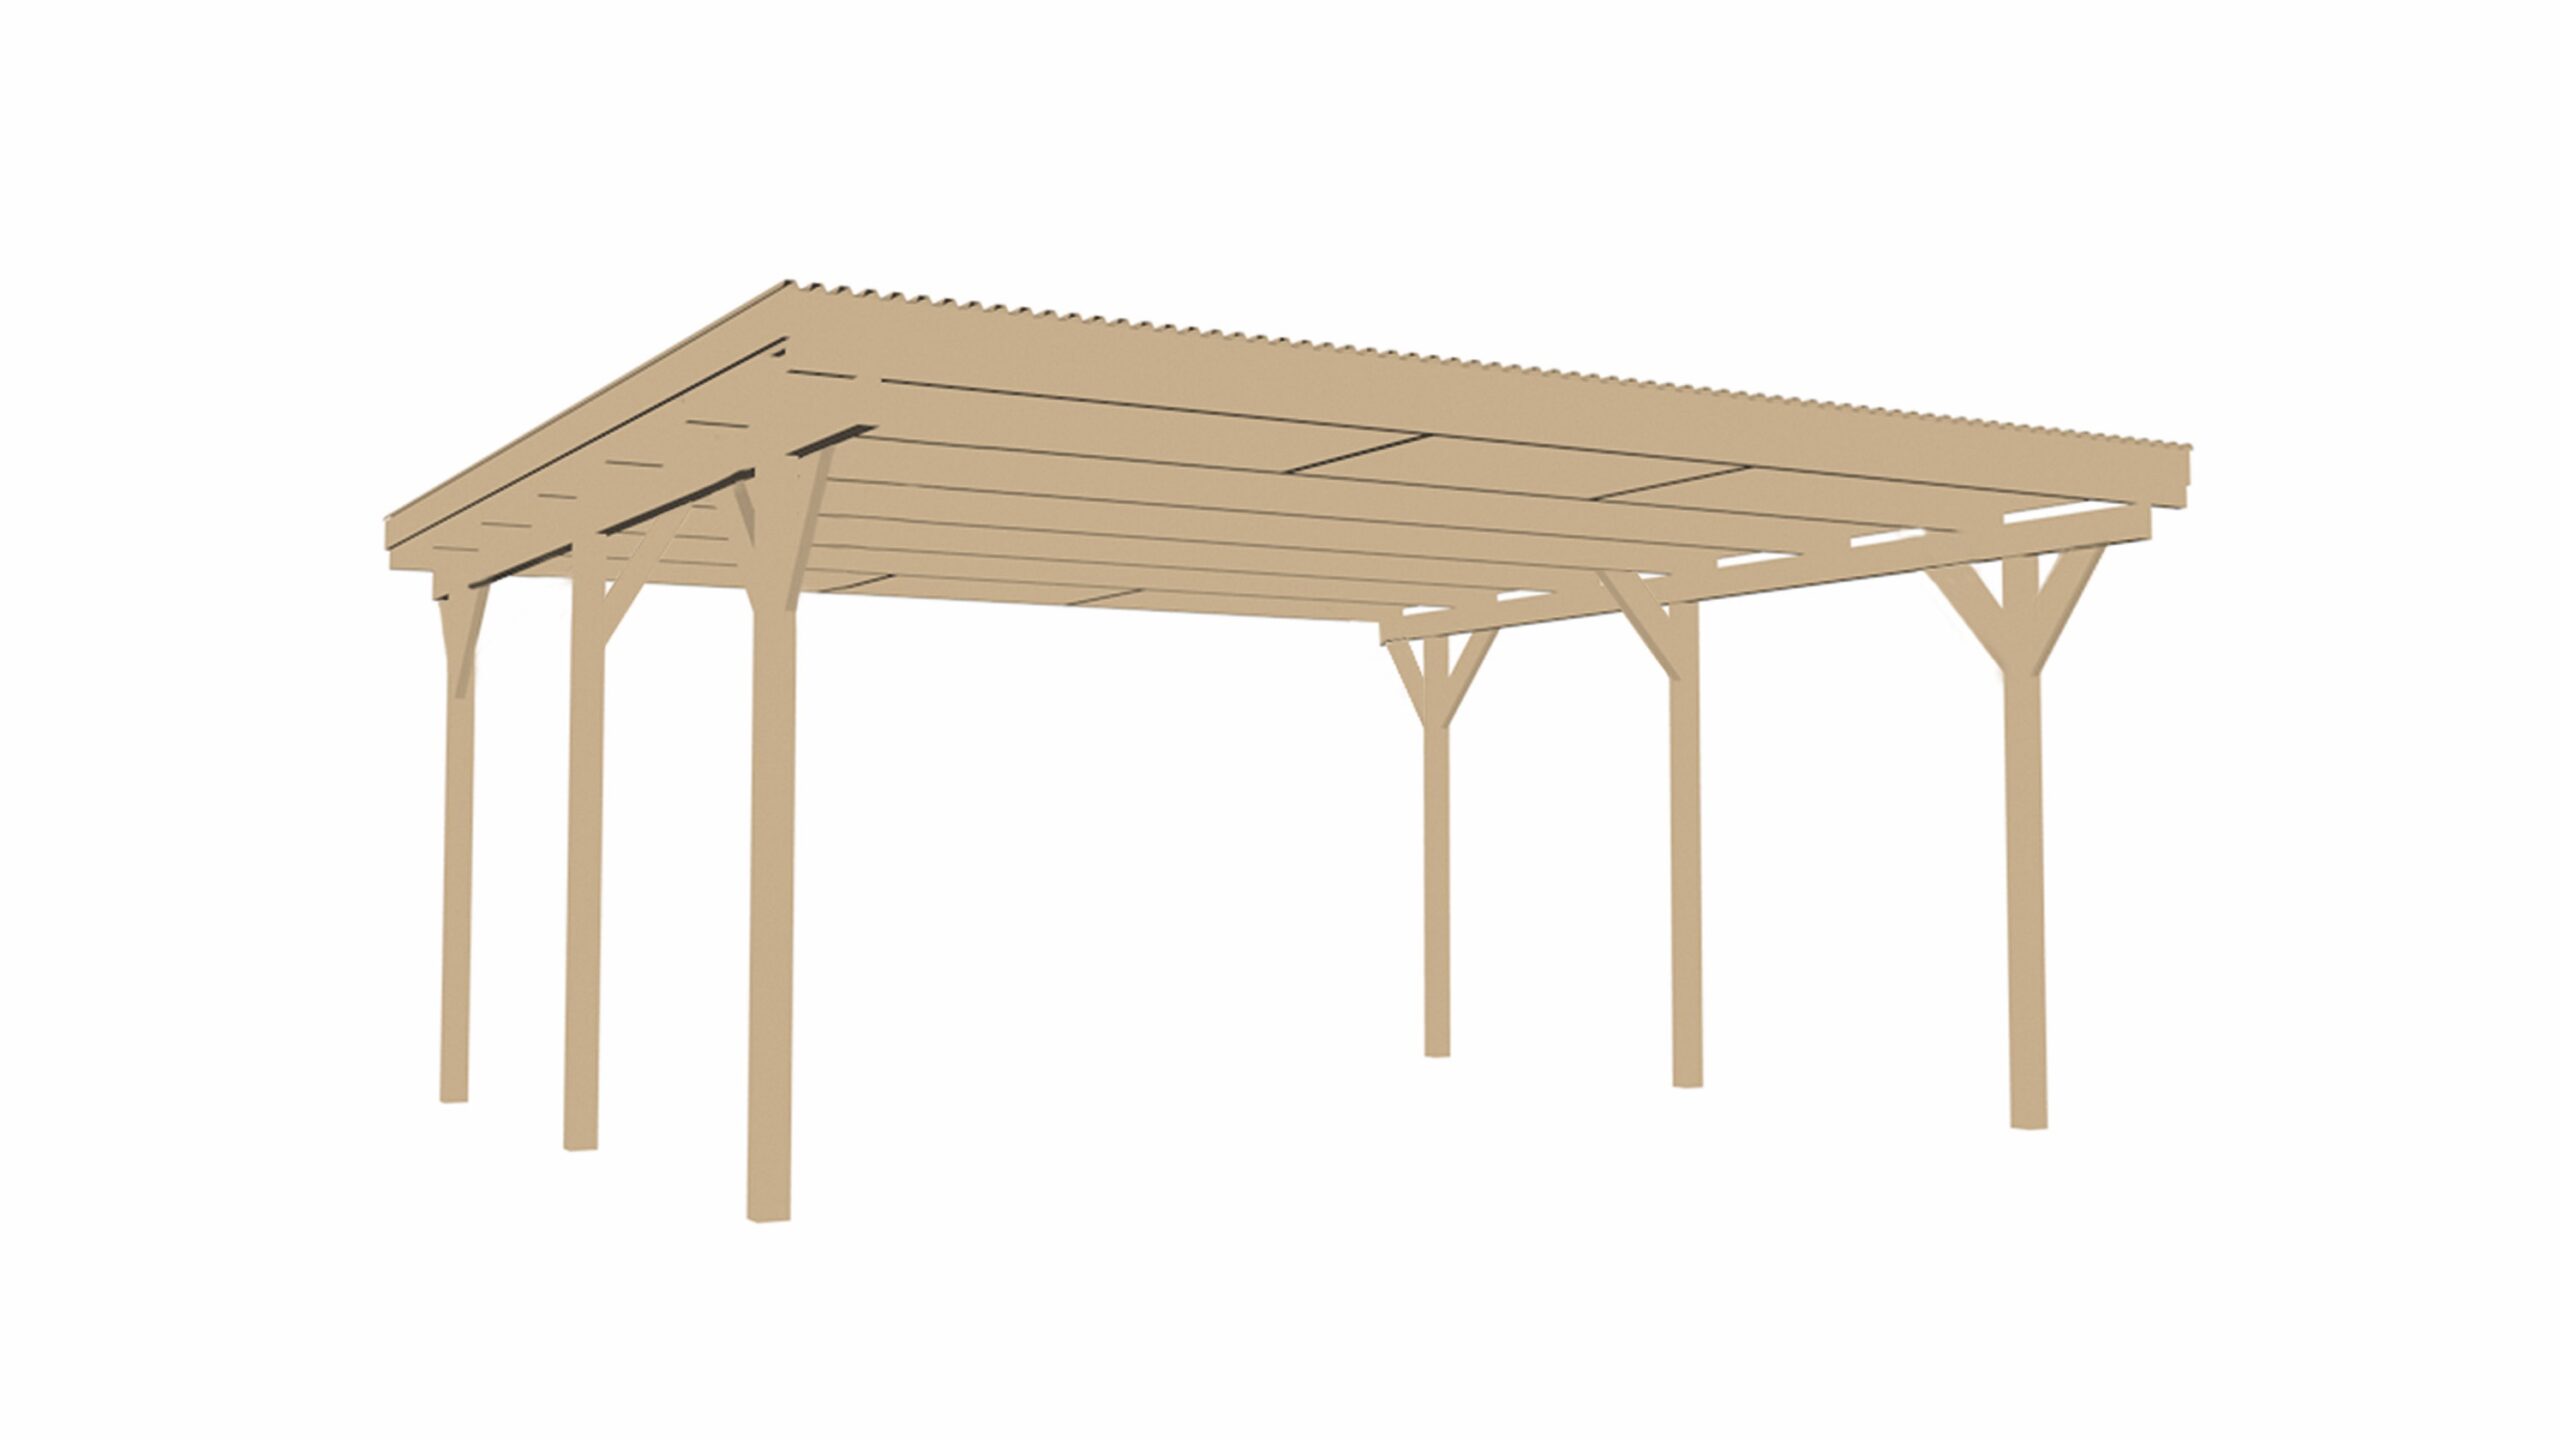 Weka Double Carport with Flat Roof - a dry and safe space for your vehicles